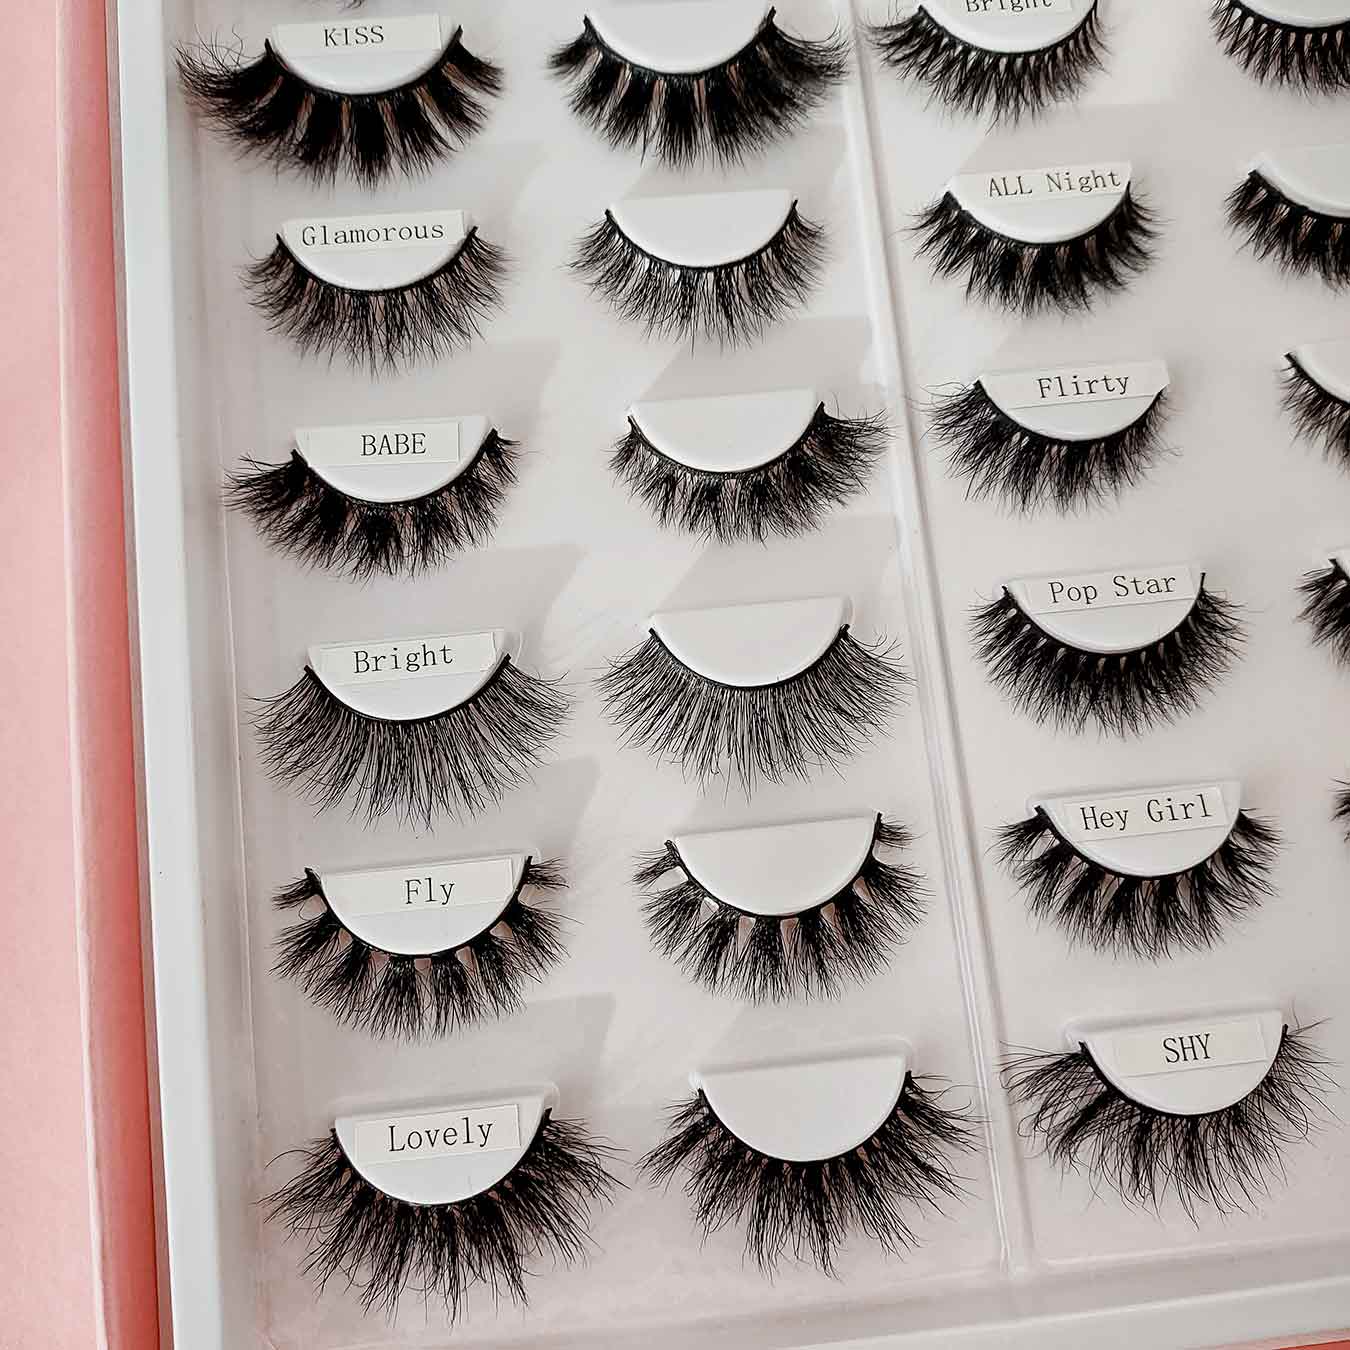 How you can take care of your mink lashes